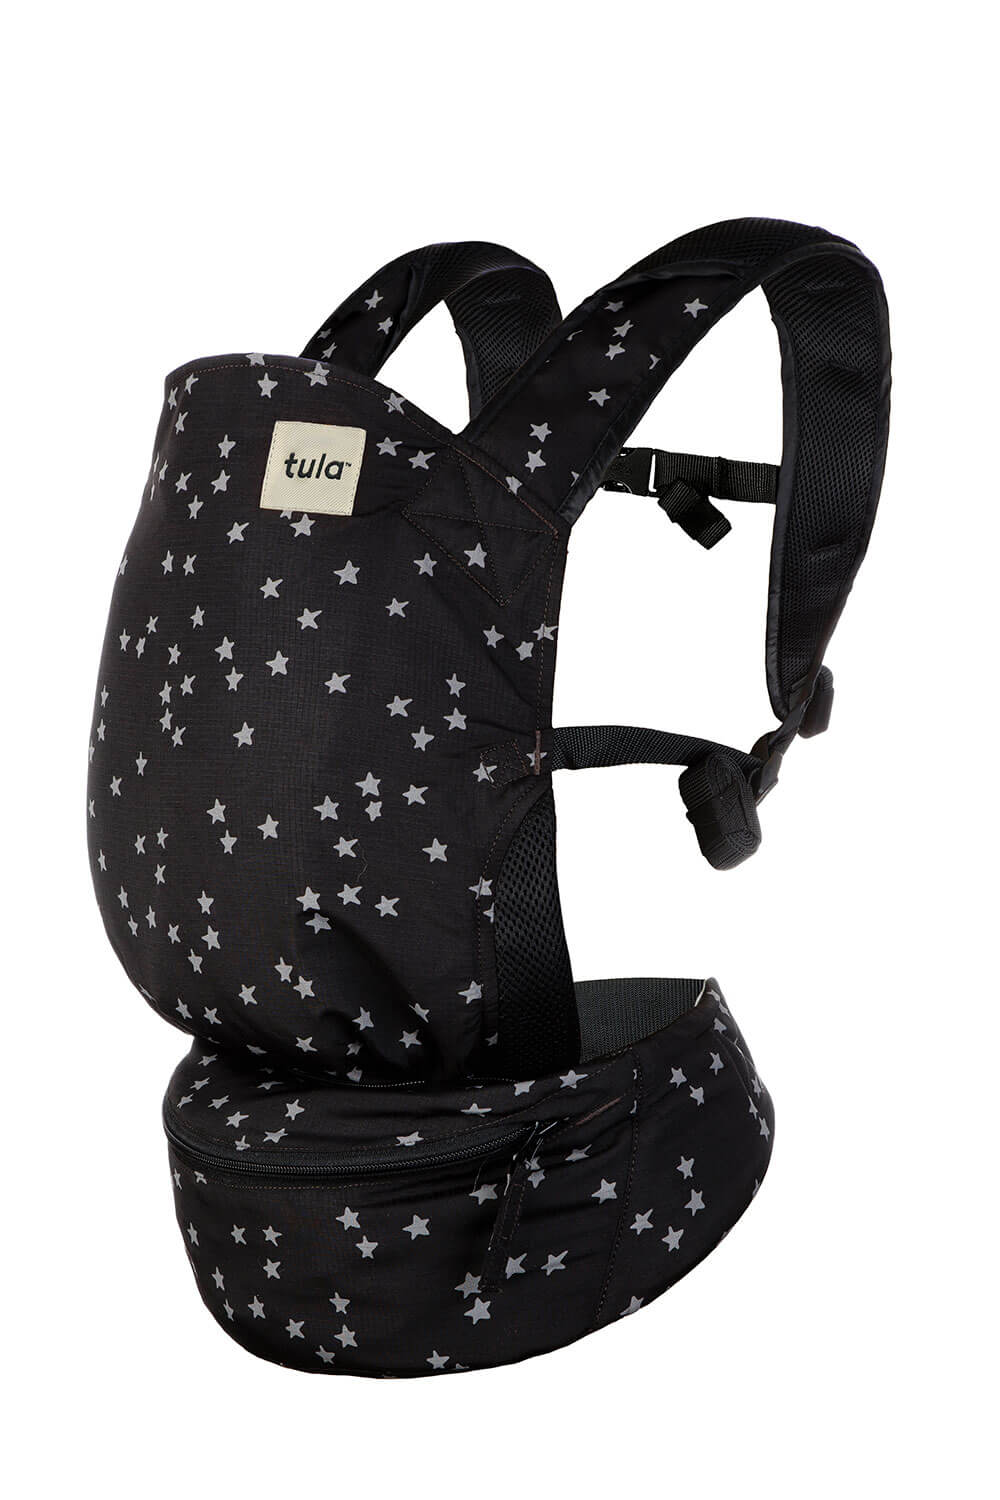 Discover Tula Lite Lightweight Baby Carrier